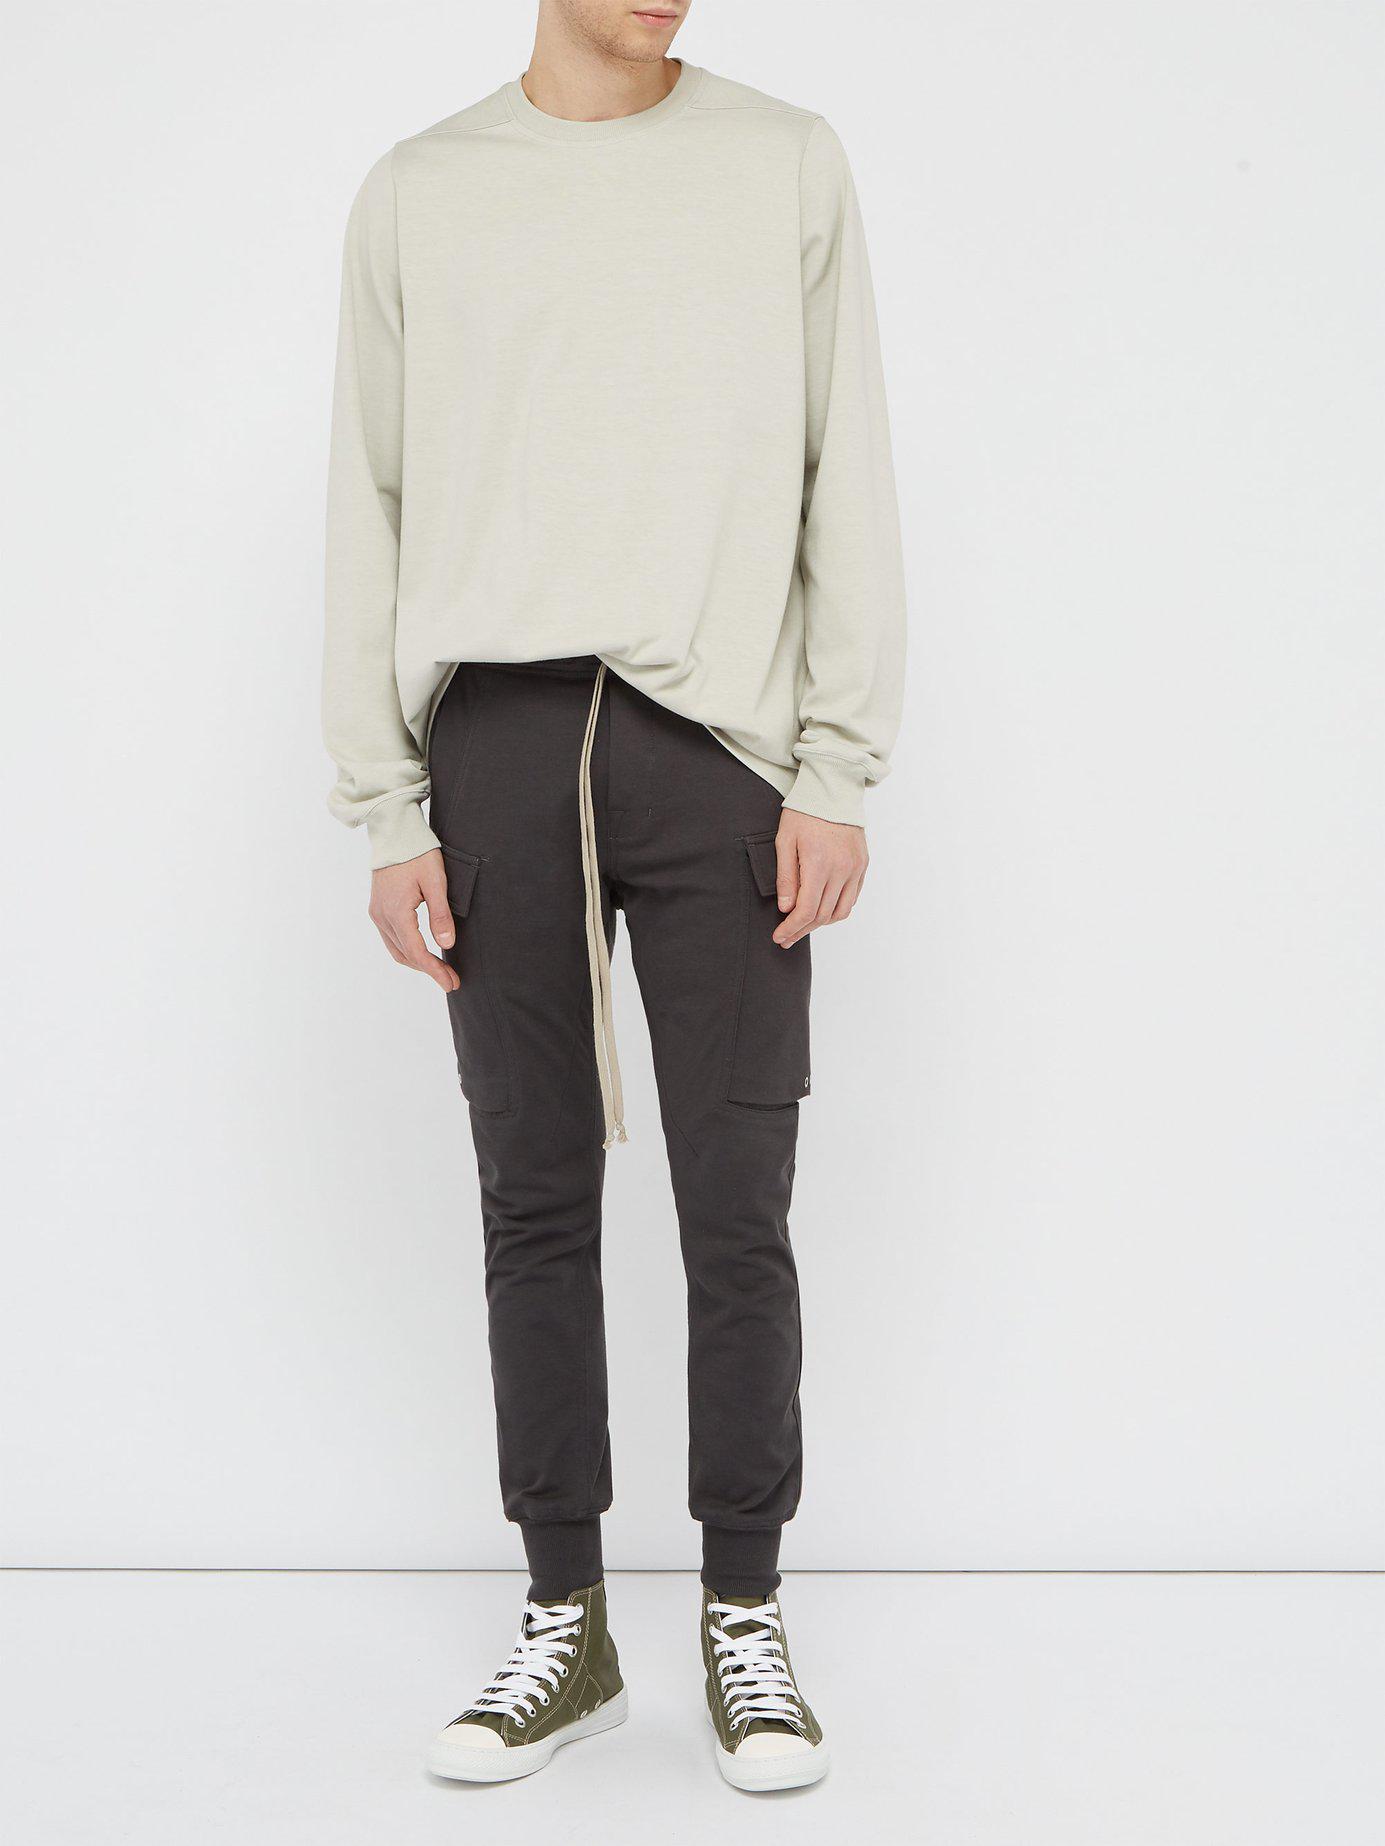 Rick Owens Babel Cotton Cargo Track Pants in Gray for Men - Lyst